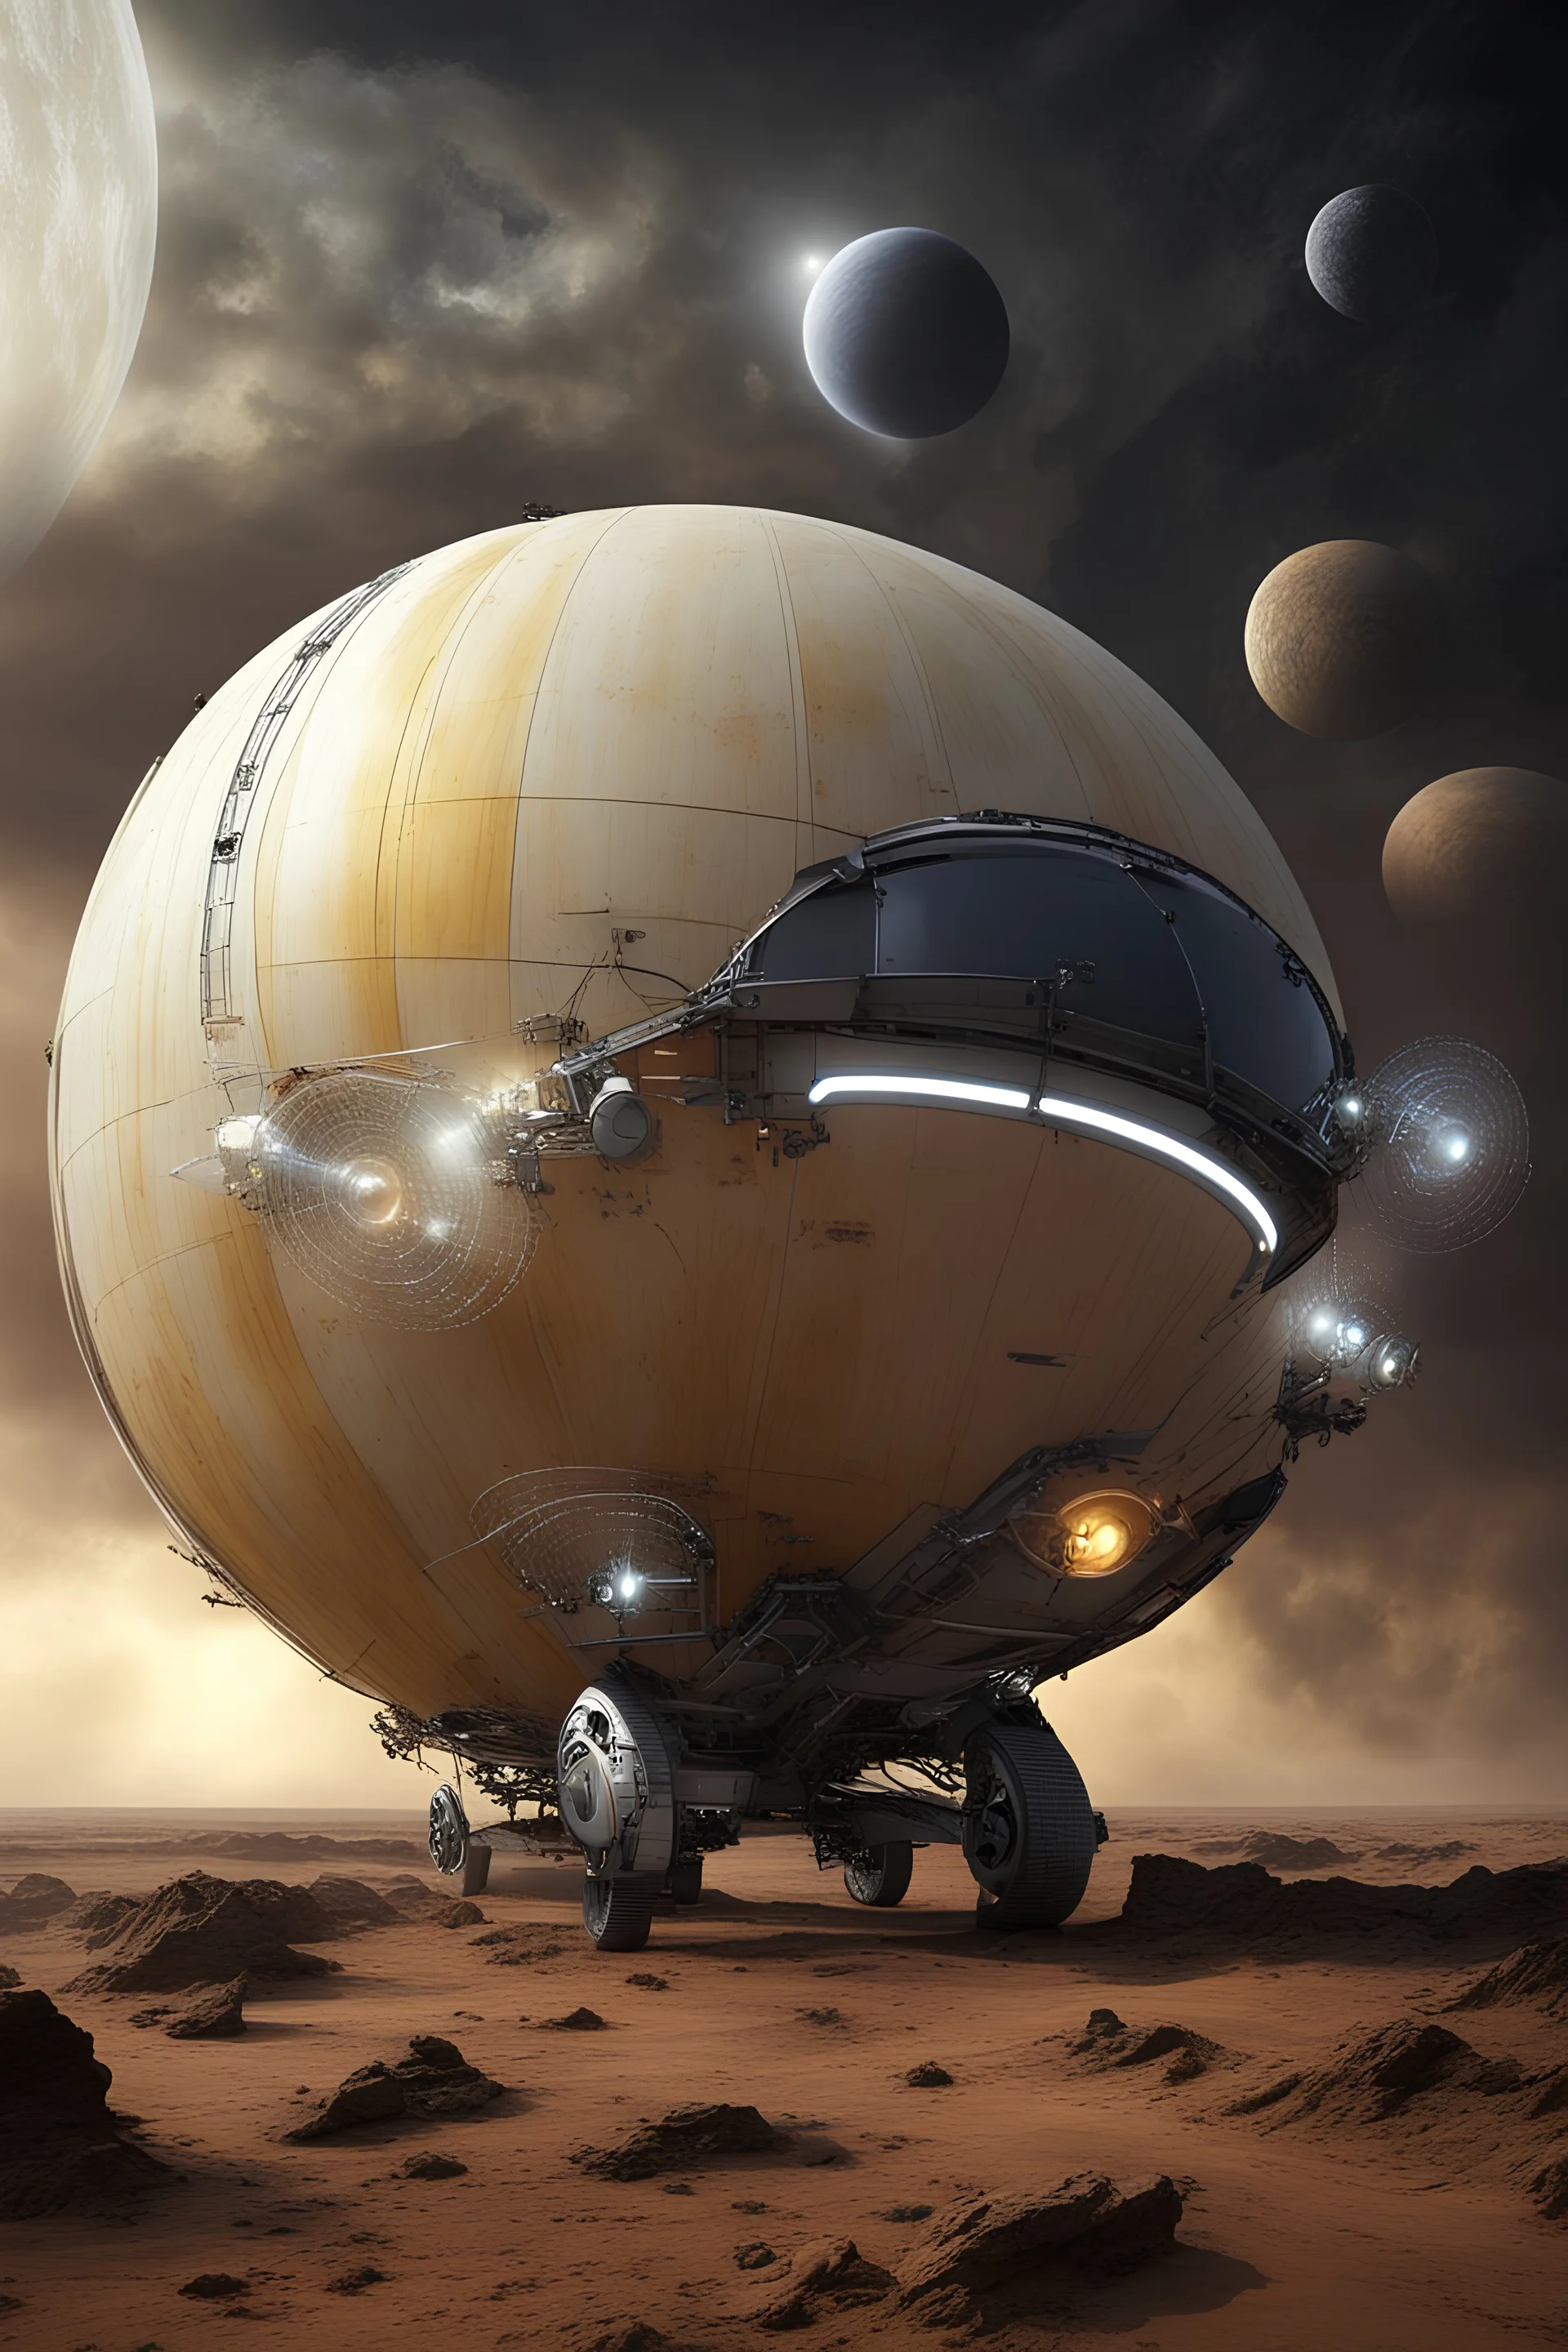 An advanced vehicle made to travel around planet venus that has bright lights that can withstands strong storms and winds, sulfric acid rains